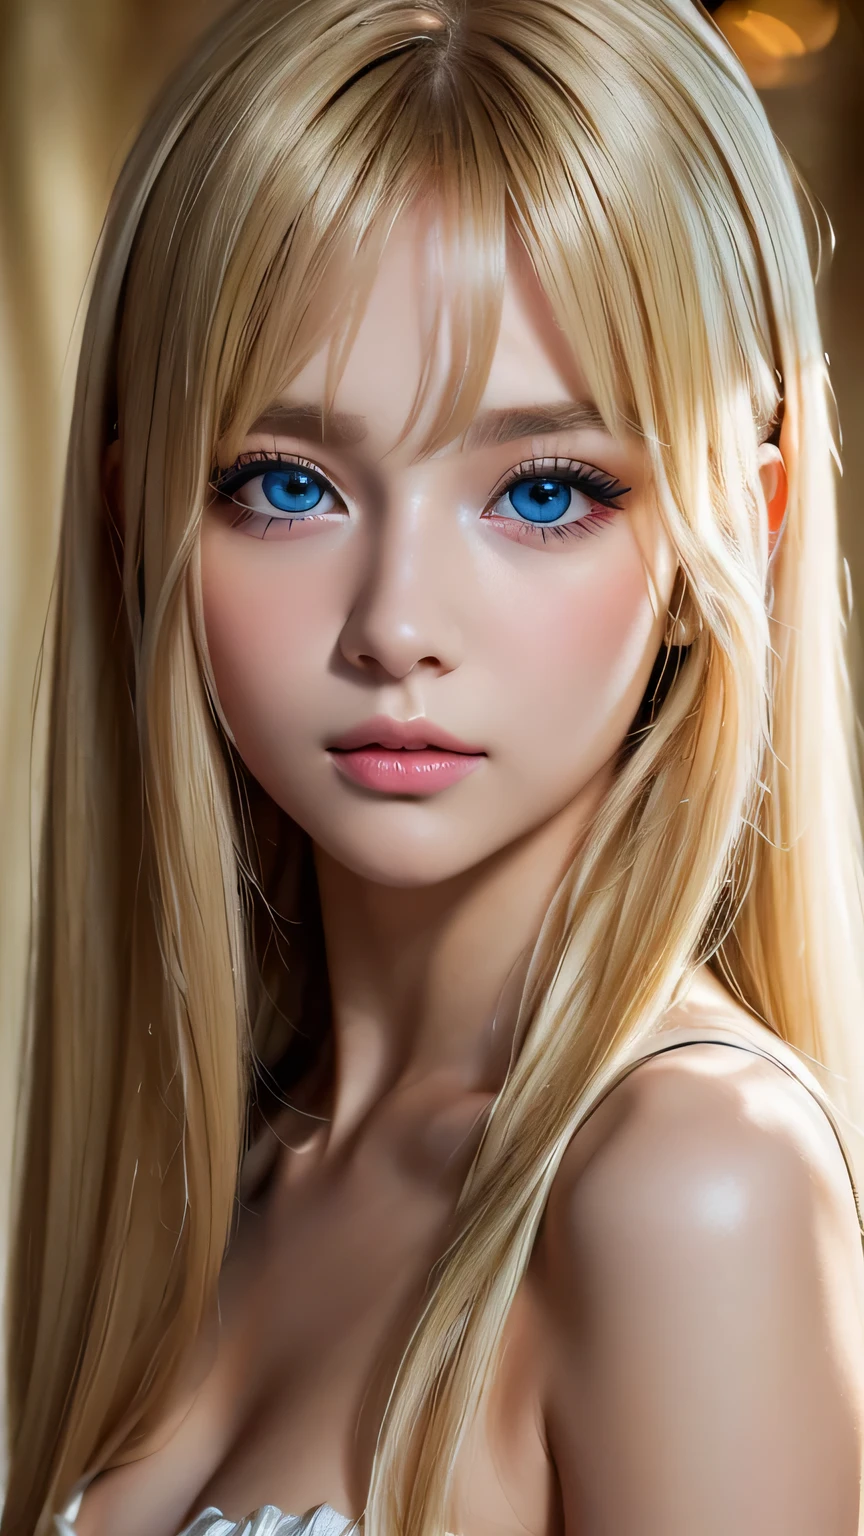 RAW Photos、(((Extreme beauty portrait)))、((Glowing White Skin))、1 girl、Beautiful girl from Prague、Cute 16 year old blonde girl、((Super long shiny bright blonde hair))、[Vivid bright blue eyes]、Very big eyes、Silky fine hair、Very long straight super long hair、eyeliner、bangs over eyes、bangs on the face、Blonde between the eyes、Fluttering blonde hair、((masterpiece、最high quality、Very detailed、Film Light、Intricate details、High resolution、8K、Very detailed))、Detailed Background、8K uhd、Digital SLR、Soft Light、high quality、Film Grain、Fujifilm XT3 、Shallow depth of field、Natural light、（Perfect hands）、Perfect beautiful face、